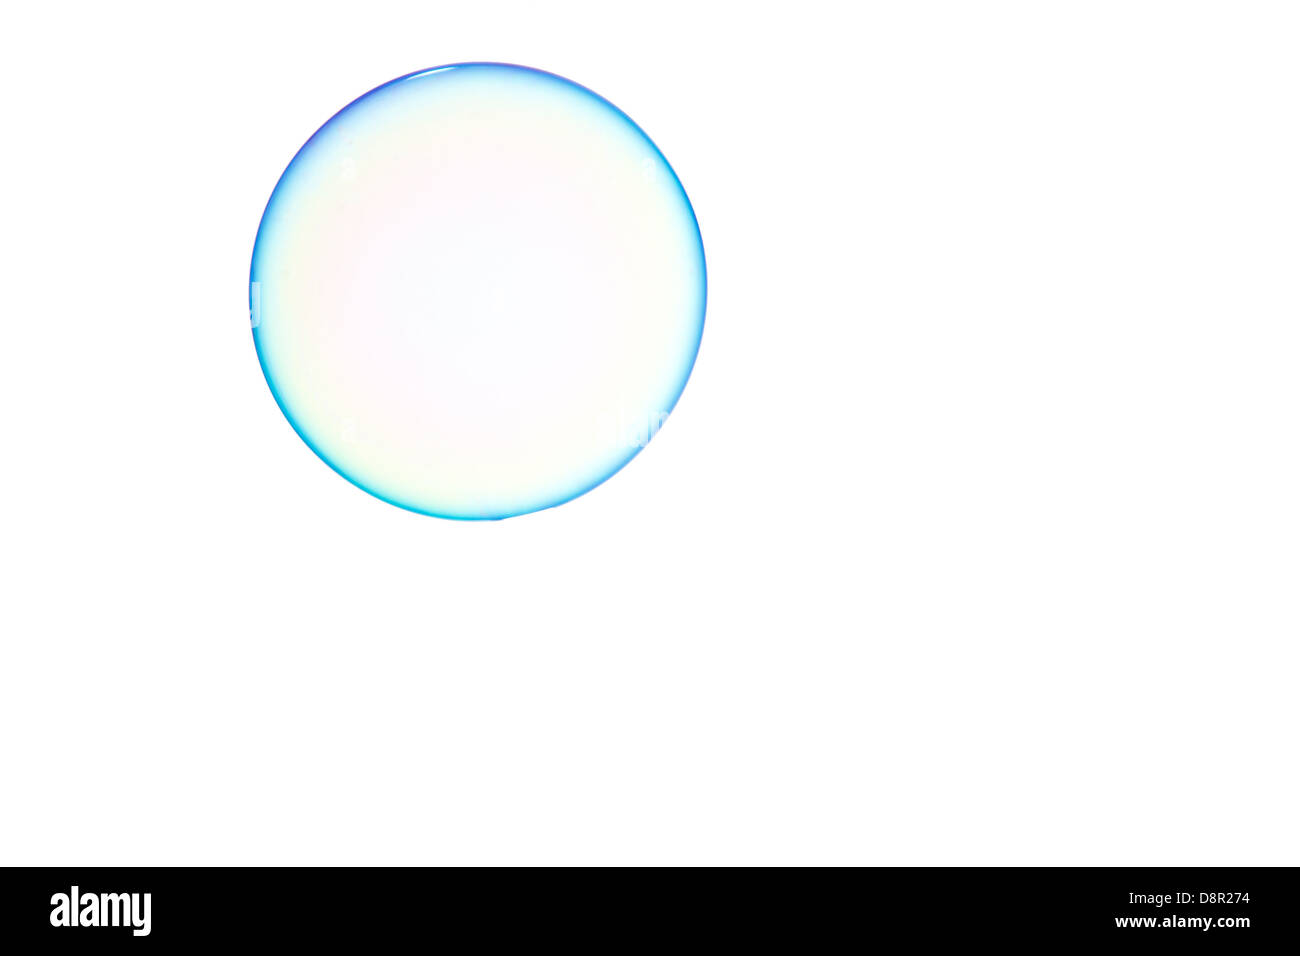 One soap bubble on a white background Stock Photo